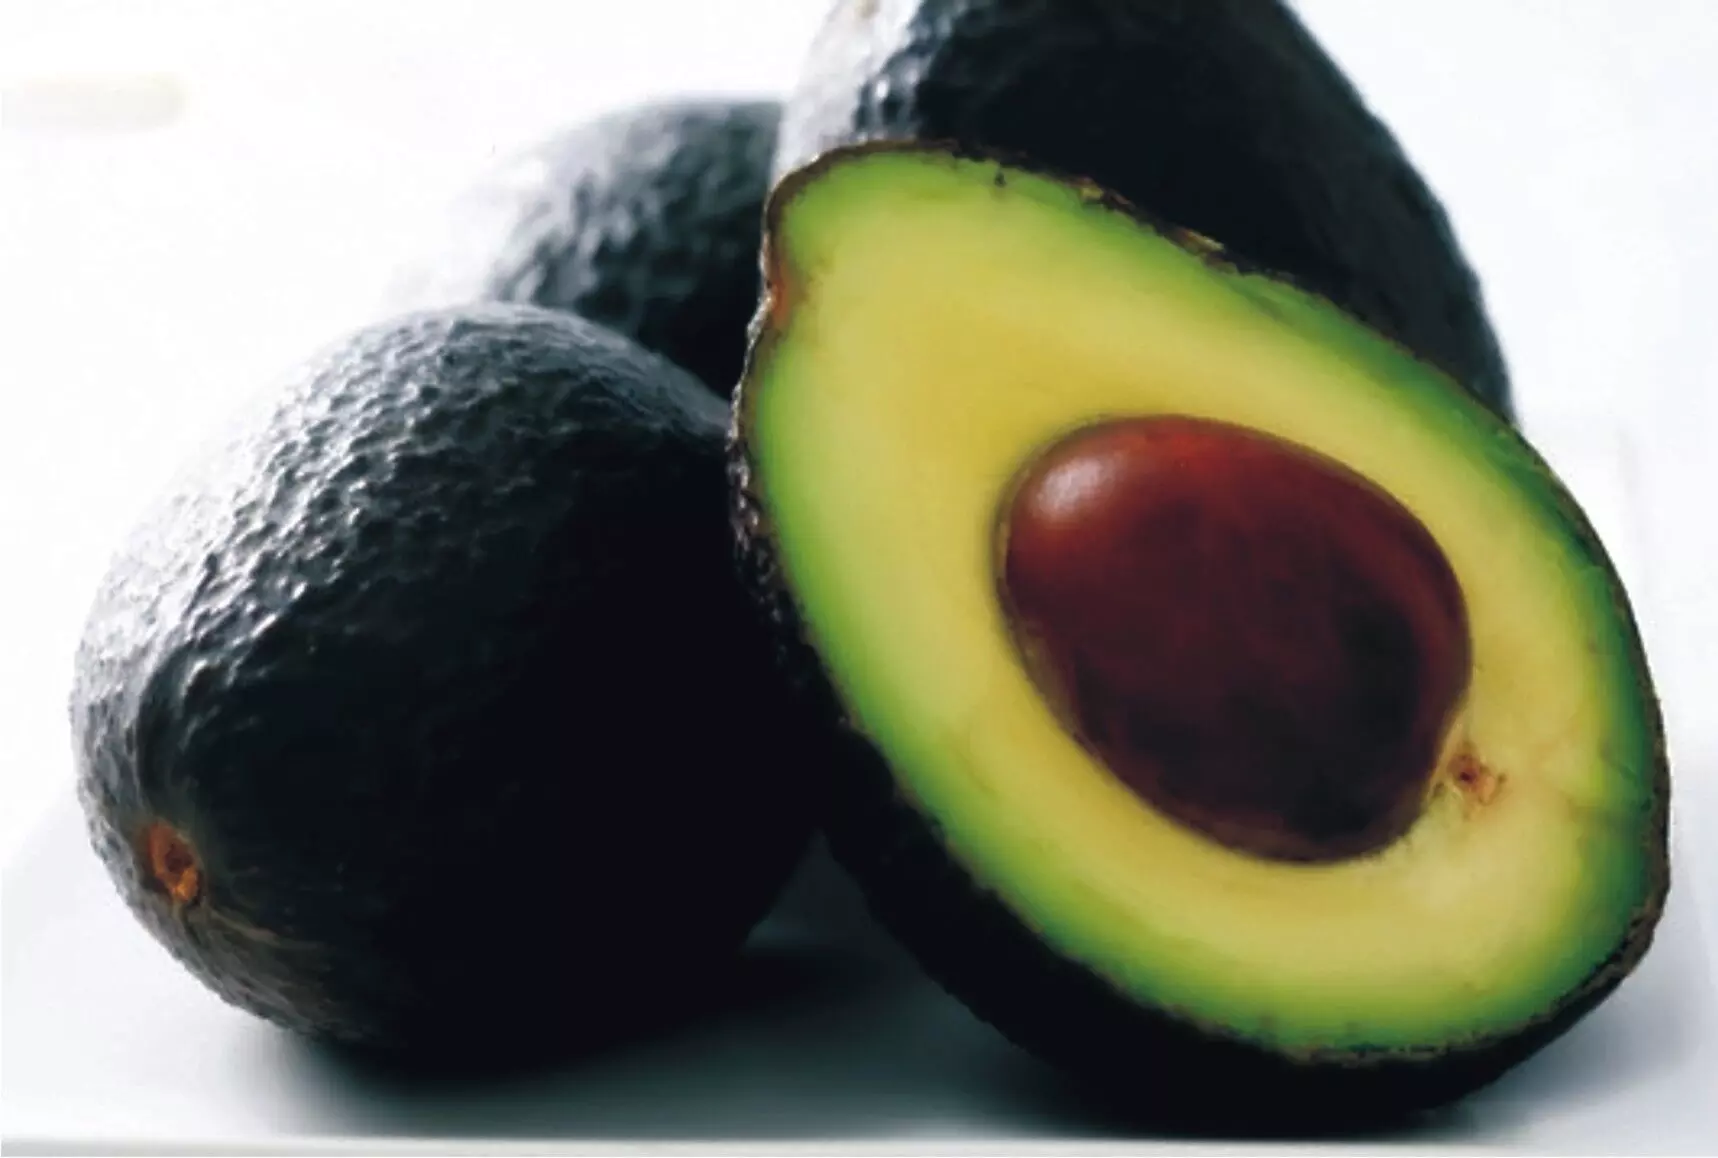 Avocados: Health Benefits, Risks & Nutrition Facts